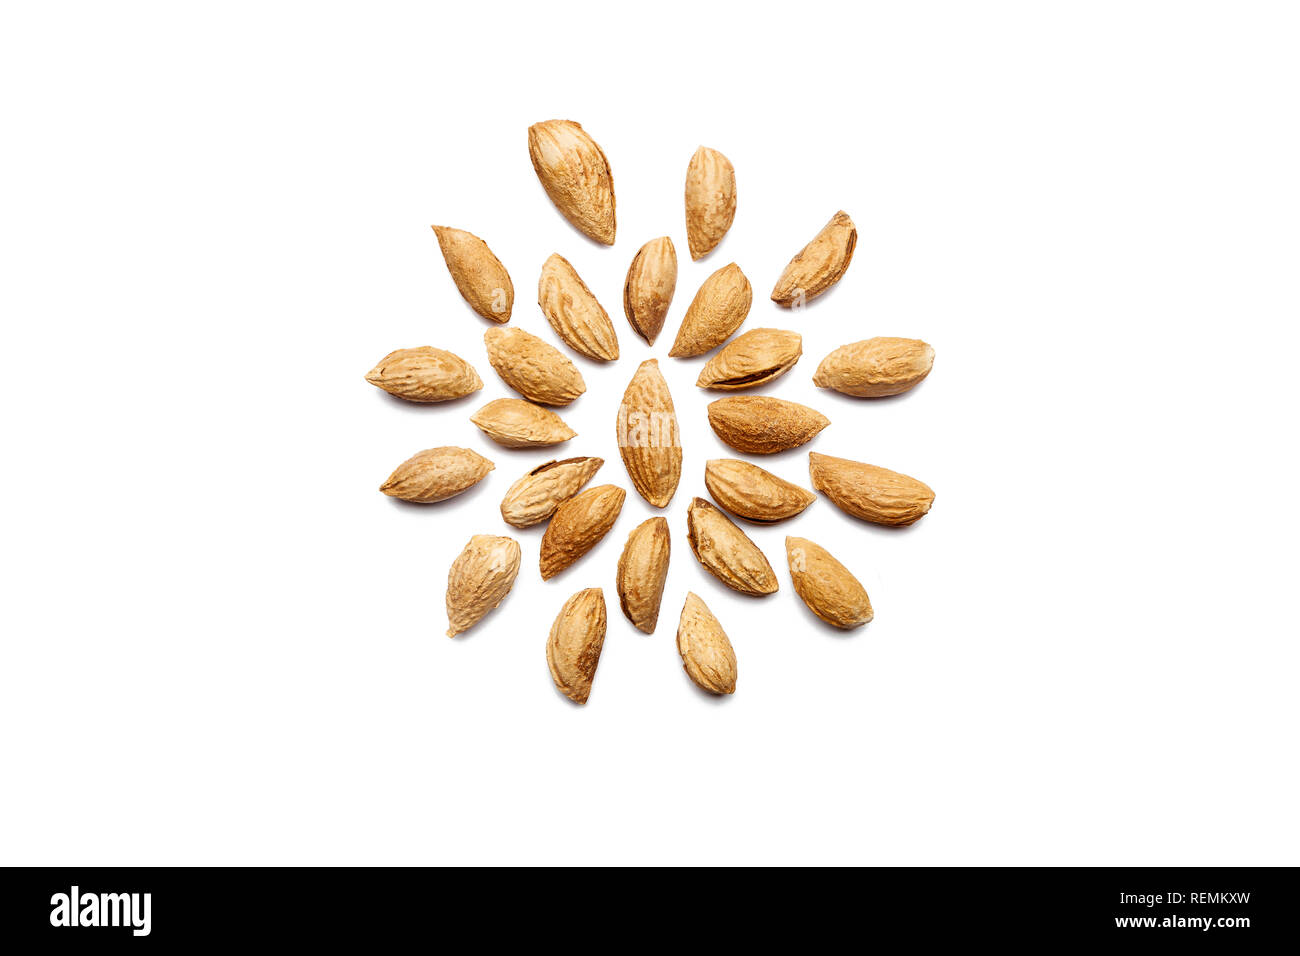 Pattern of Nuts - peeled almonds Badam on a white background in the form of a circle. Concepts about decoration, healthy eating and food background. Stock Photo